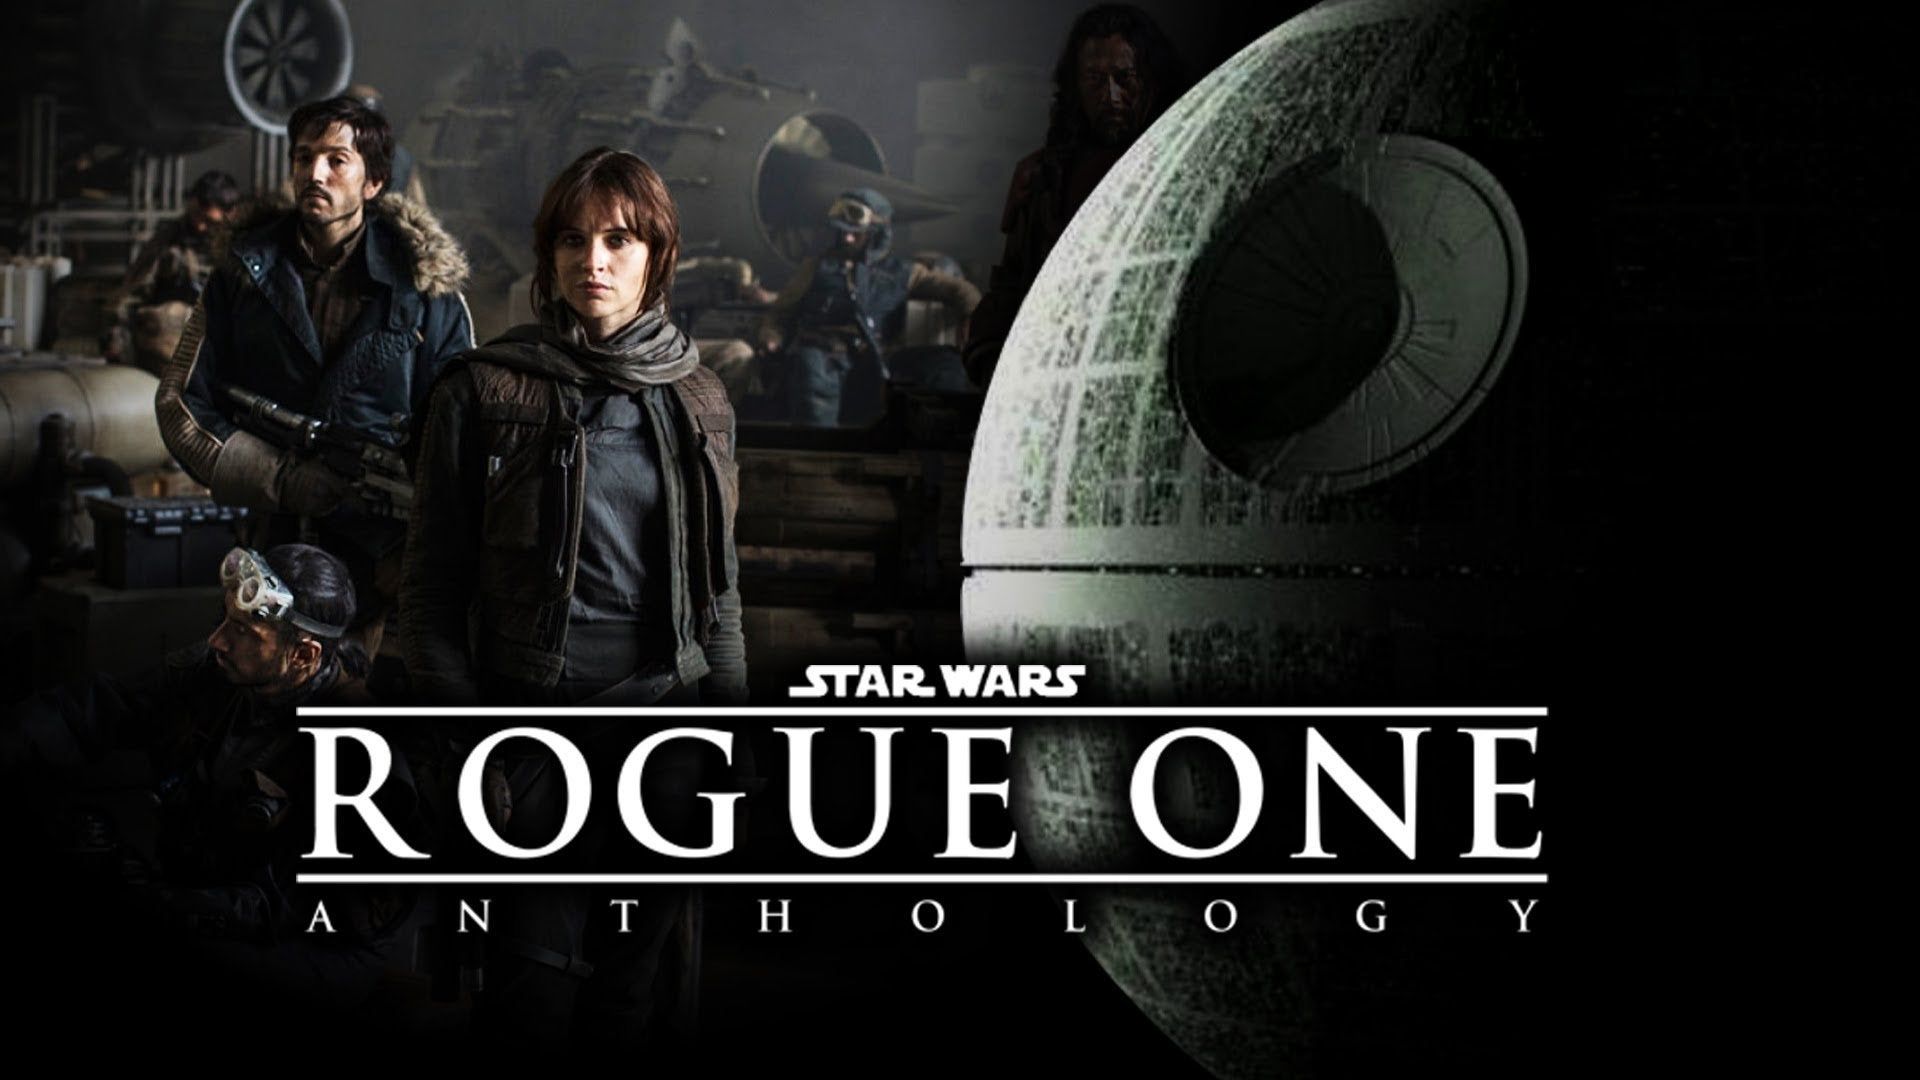 Star Wars Rogue One Wallpaper with Jyn Erso [1920 × 1080]